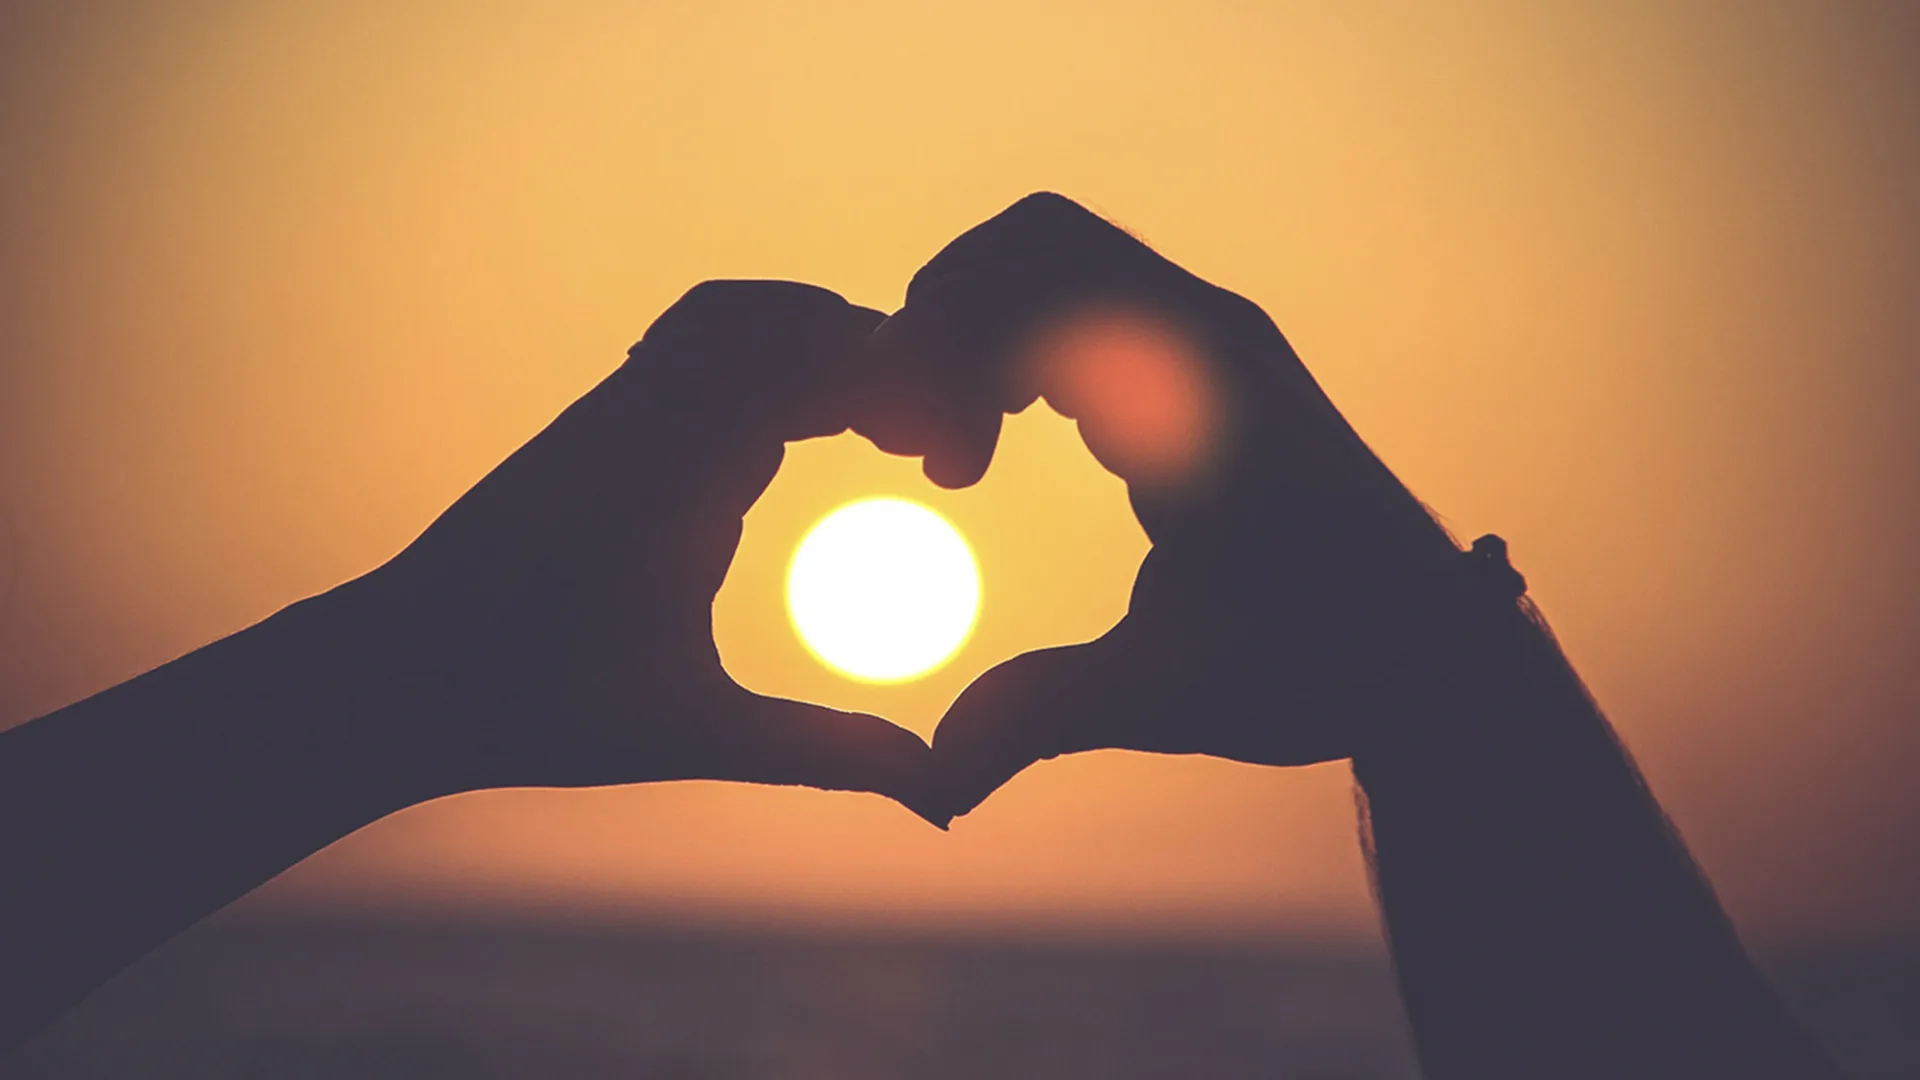 Silhouette of two peoples hands forming heart at sunset